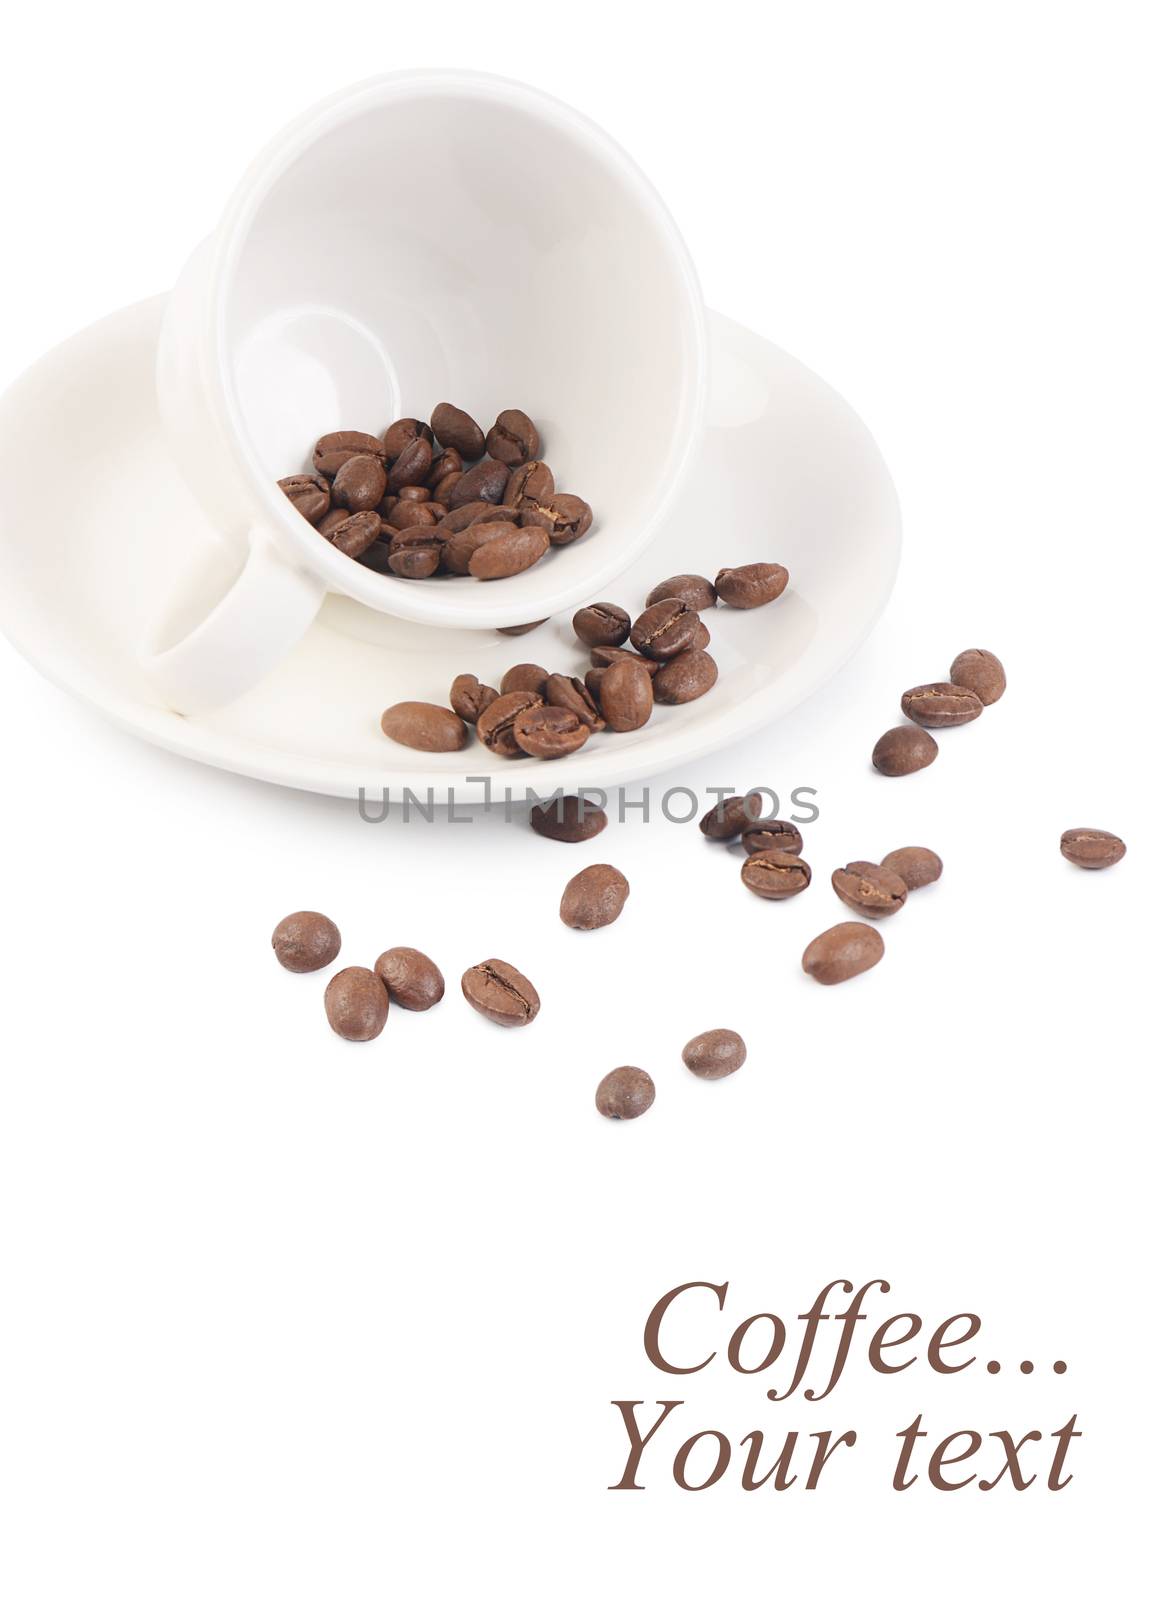 Coffee beans in a cup by SvetaVo